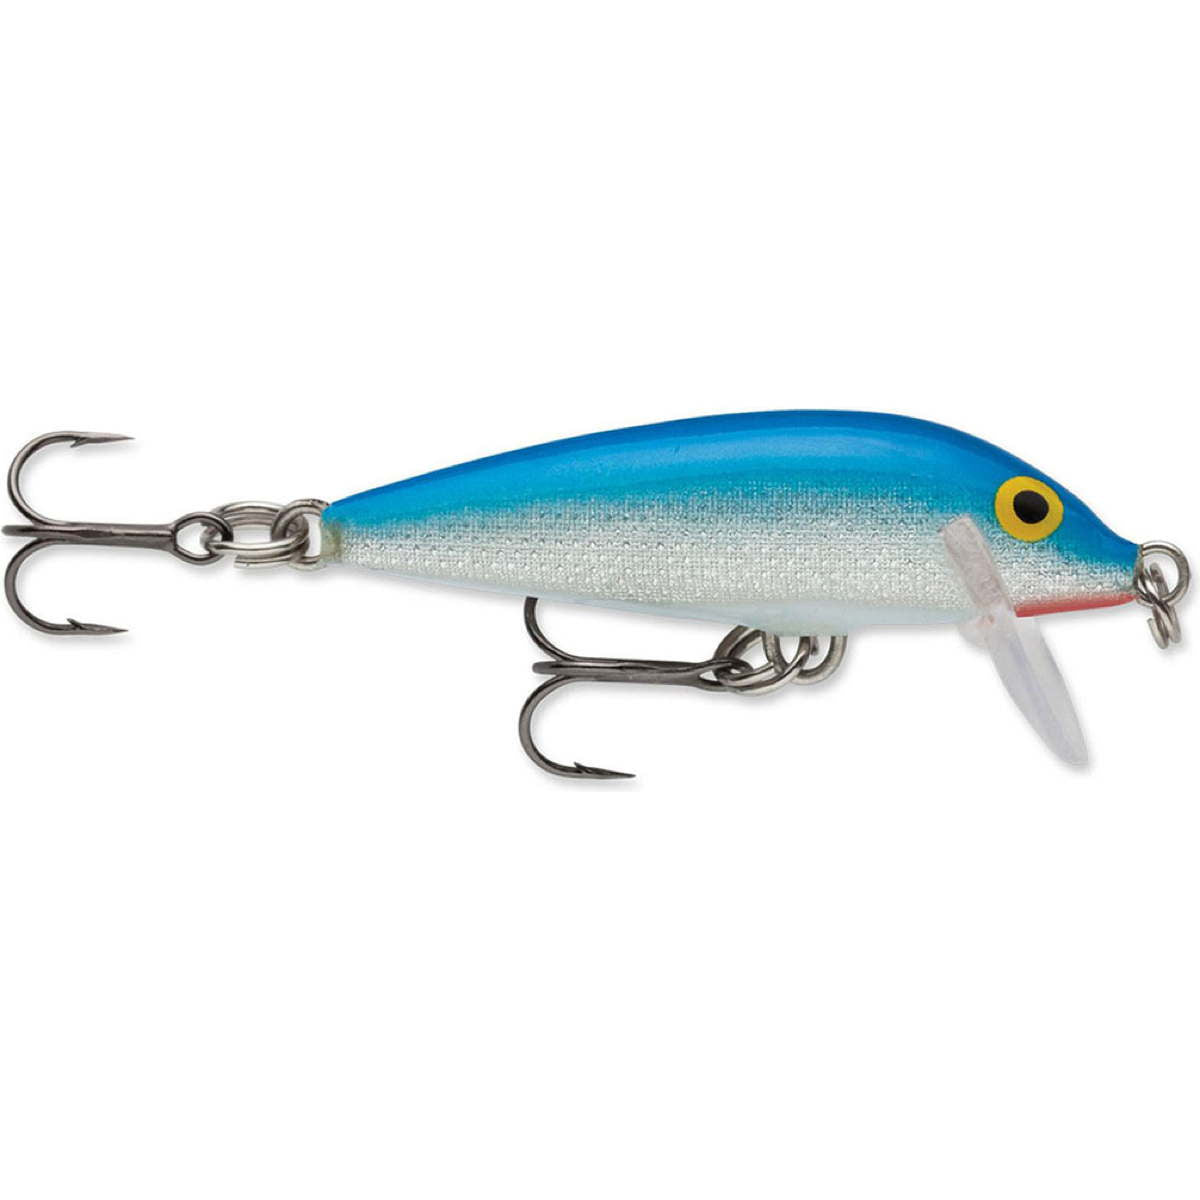 Photo of Rapala CountDown Sinking Lure for sale at United Tackle Shops.